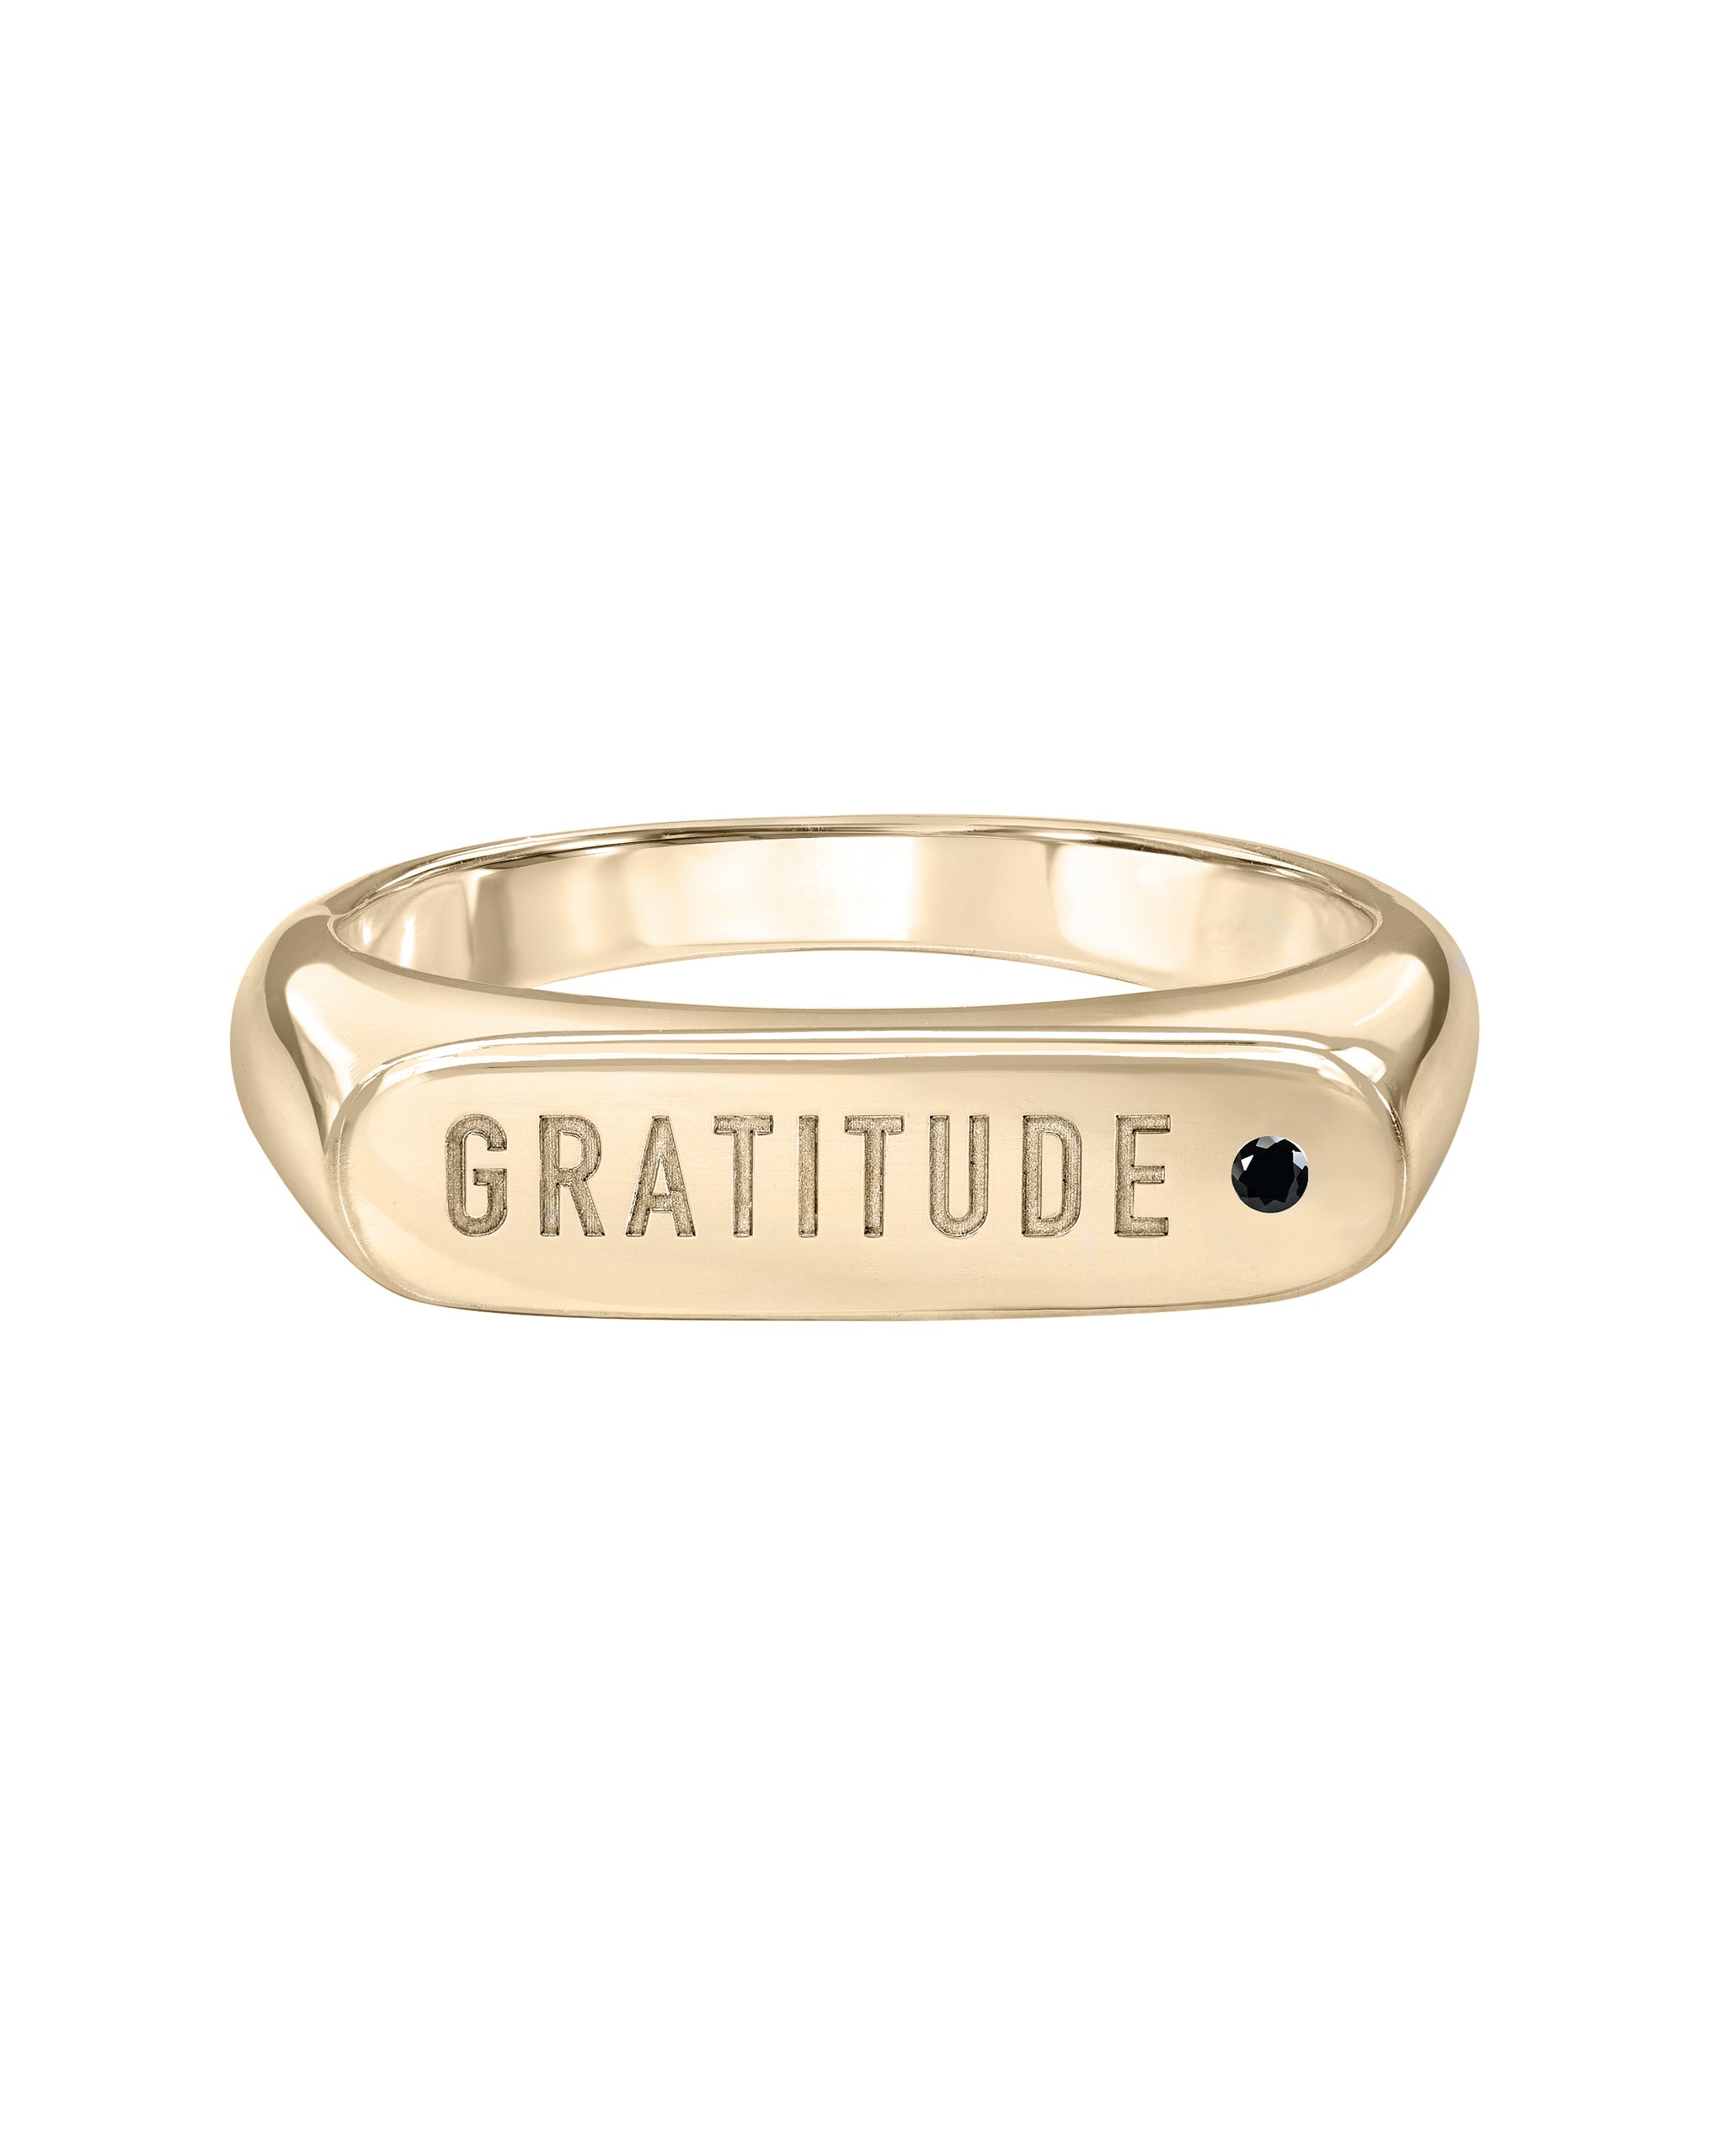 Gold Vermeil Gratitude Ring with Onyx